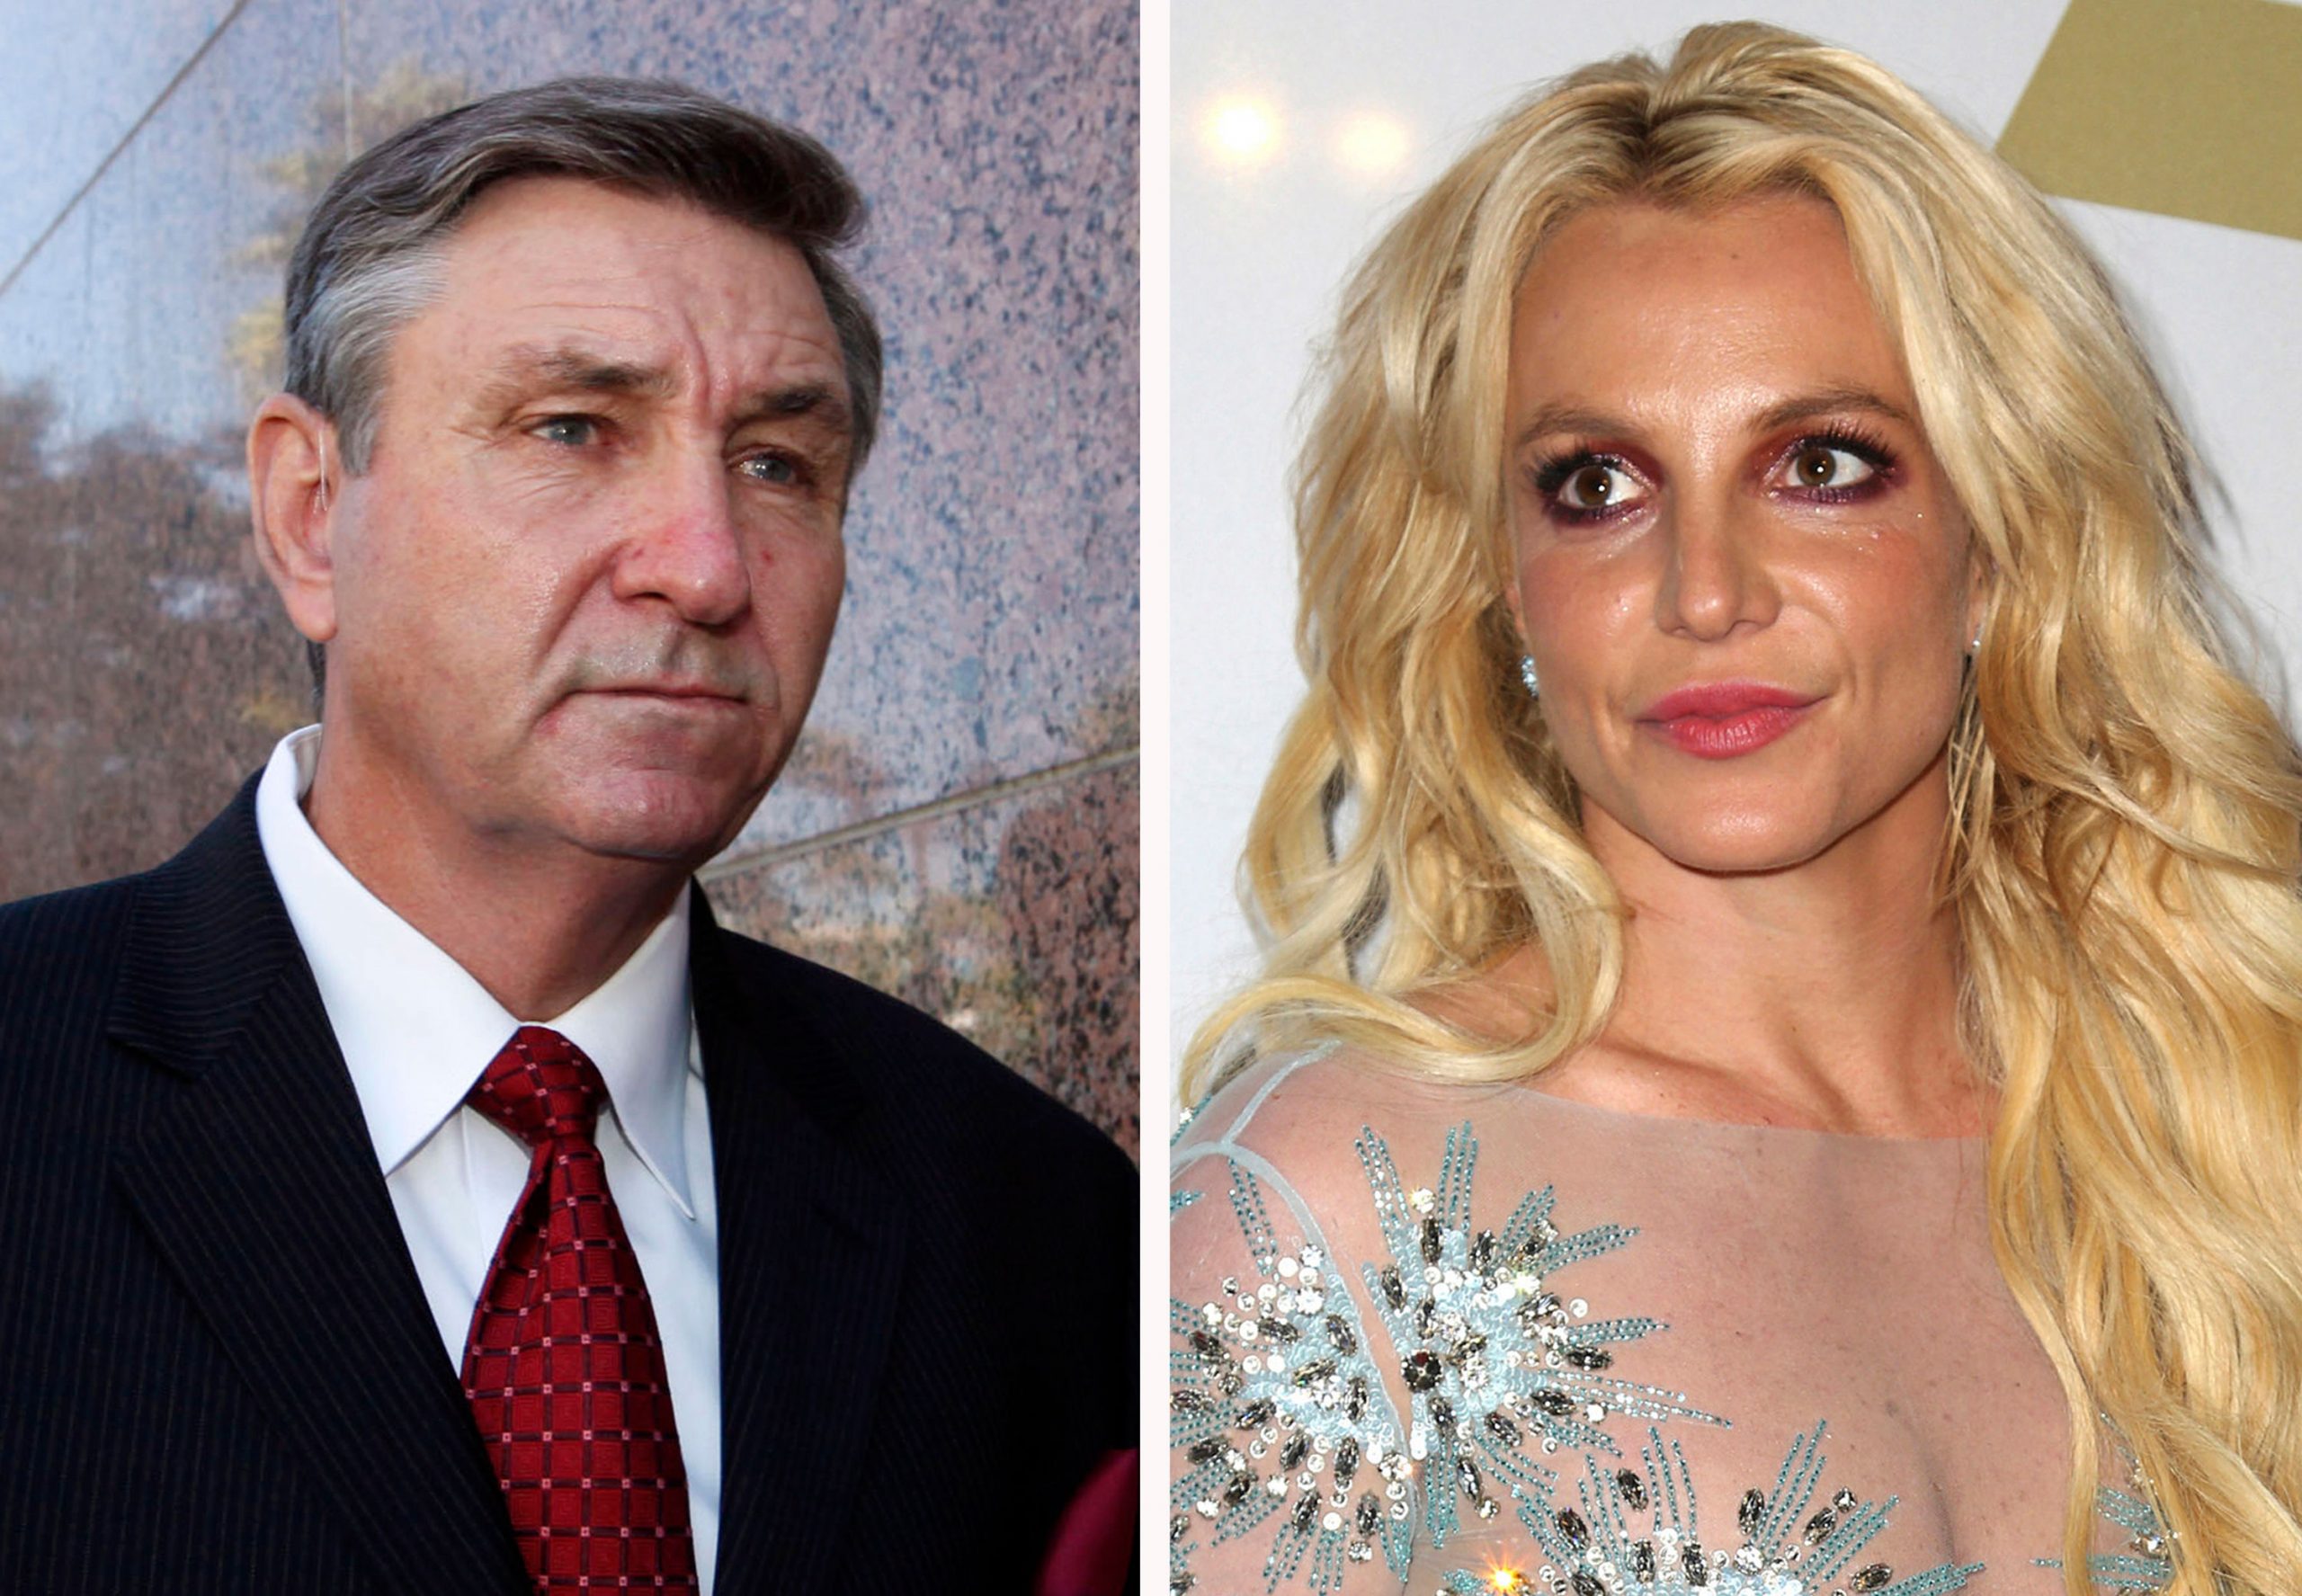 New documentary claims Britney Spears’ phone, bedroom were bugged